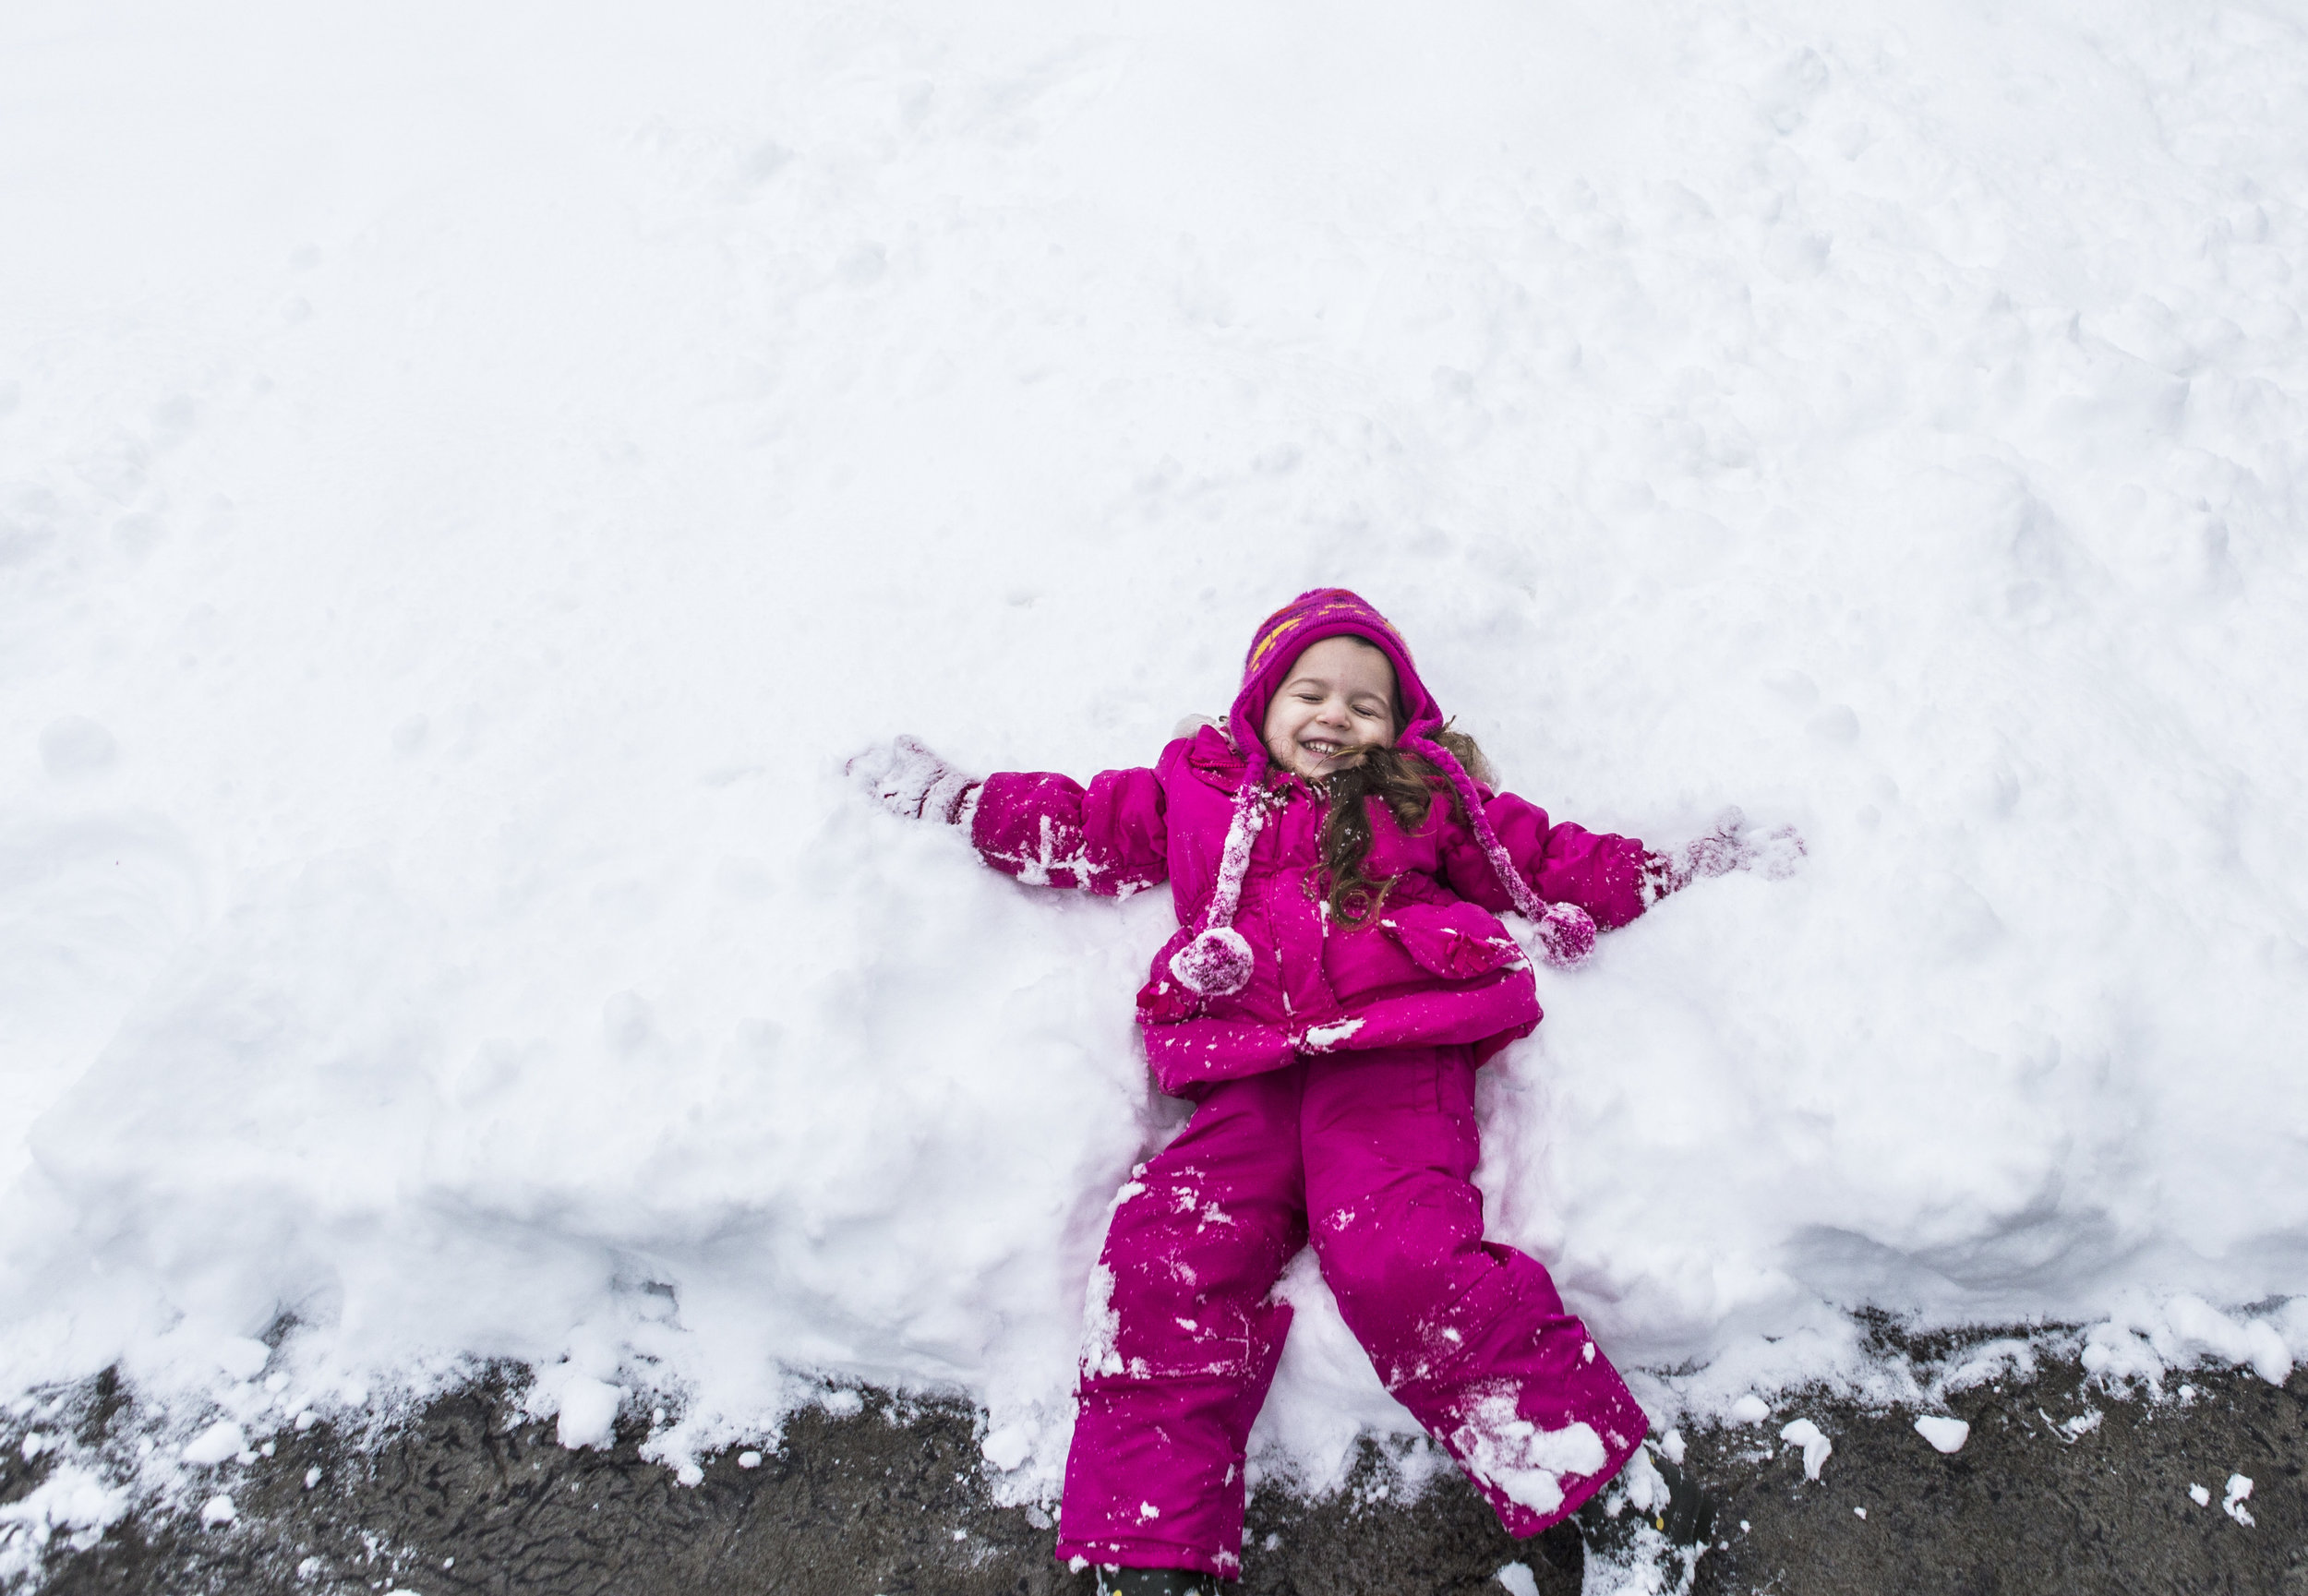  Kaylee Williams, 3, smiles as she makes her first snow angel of the day in the front yard of her family's home on Saturday, Feb. 9, 2019 in Everett, Wa. The Puget Sound area was hit by a massive snowstorm for the second time in two weeks resulting i